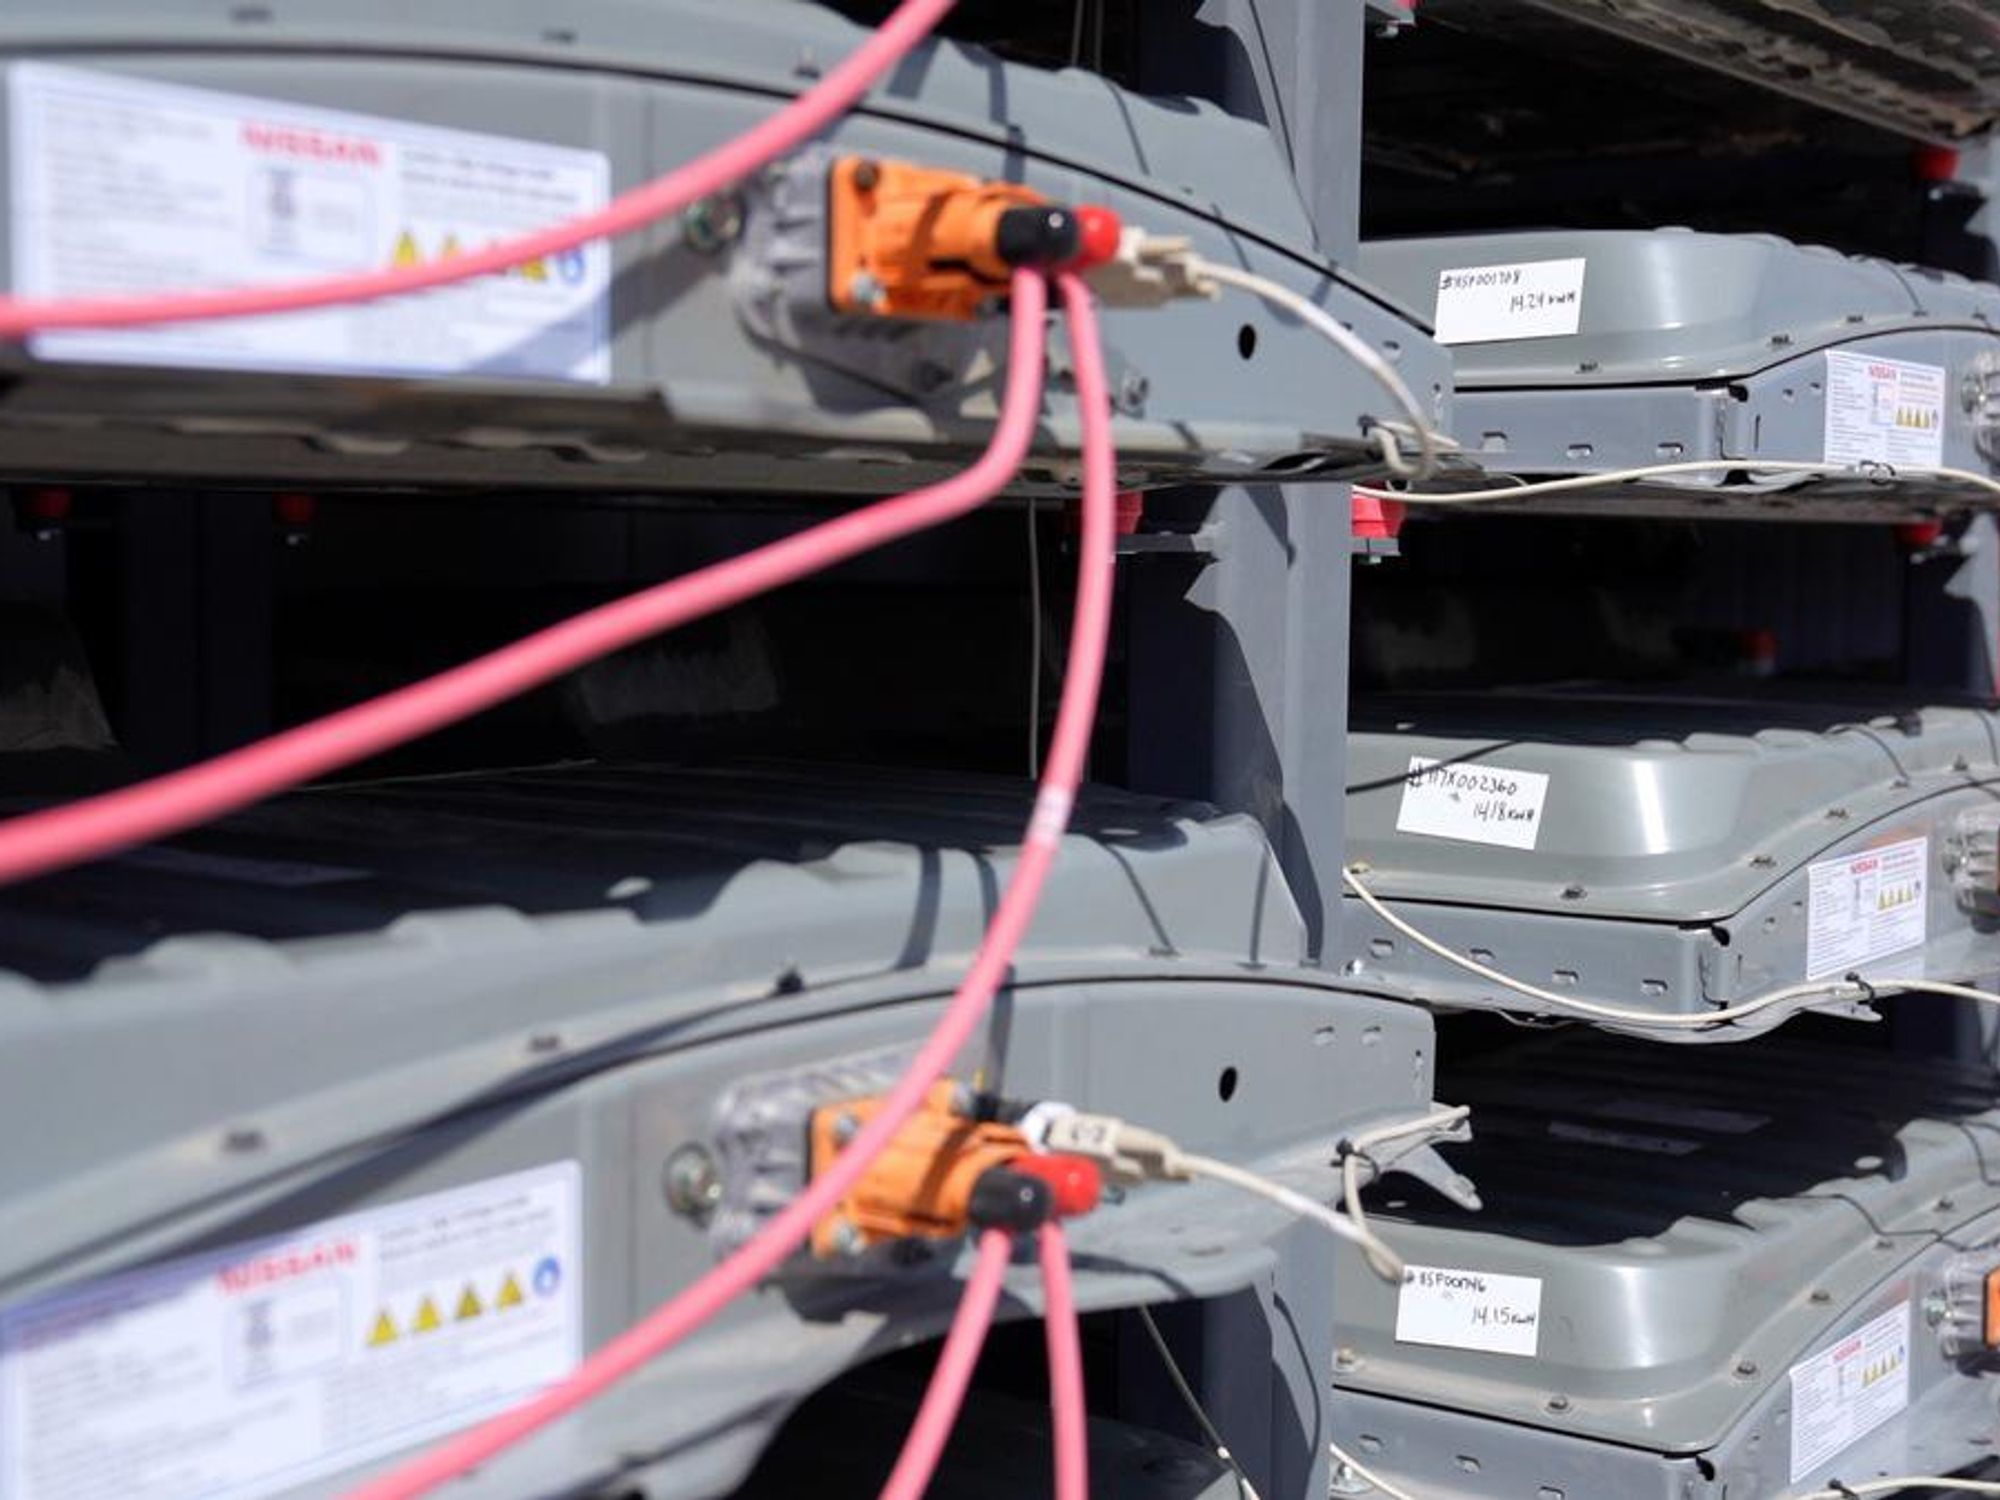 B2U's Plan to Transform More Depleted Electric Car Batteries into Solar Storage